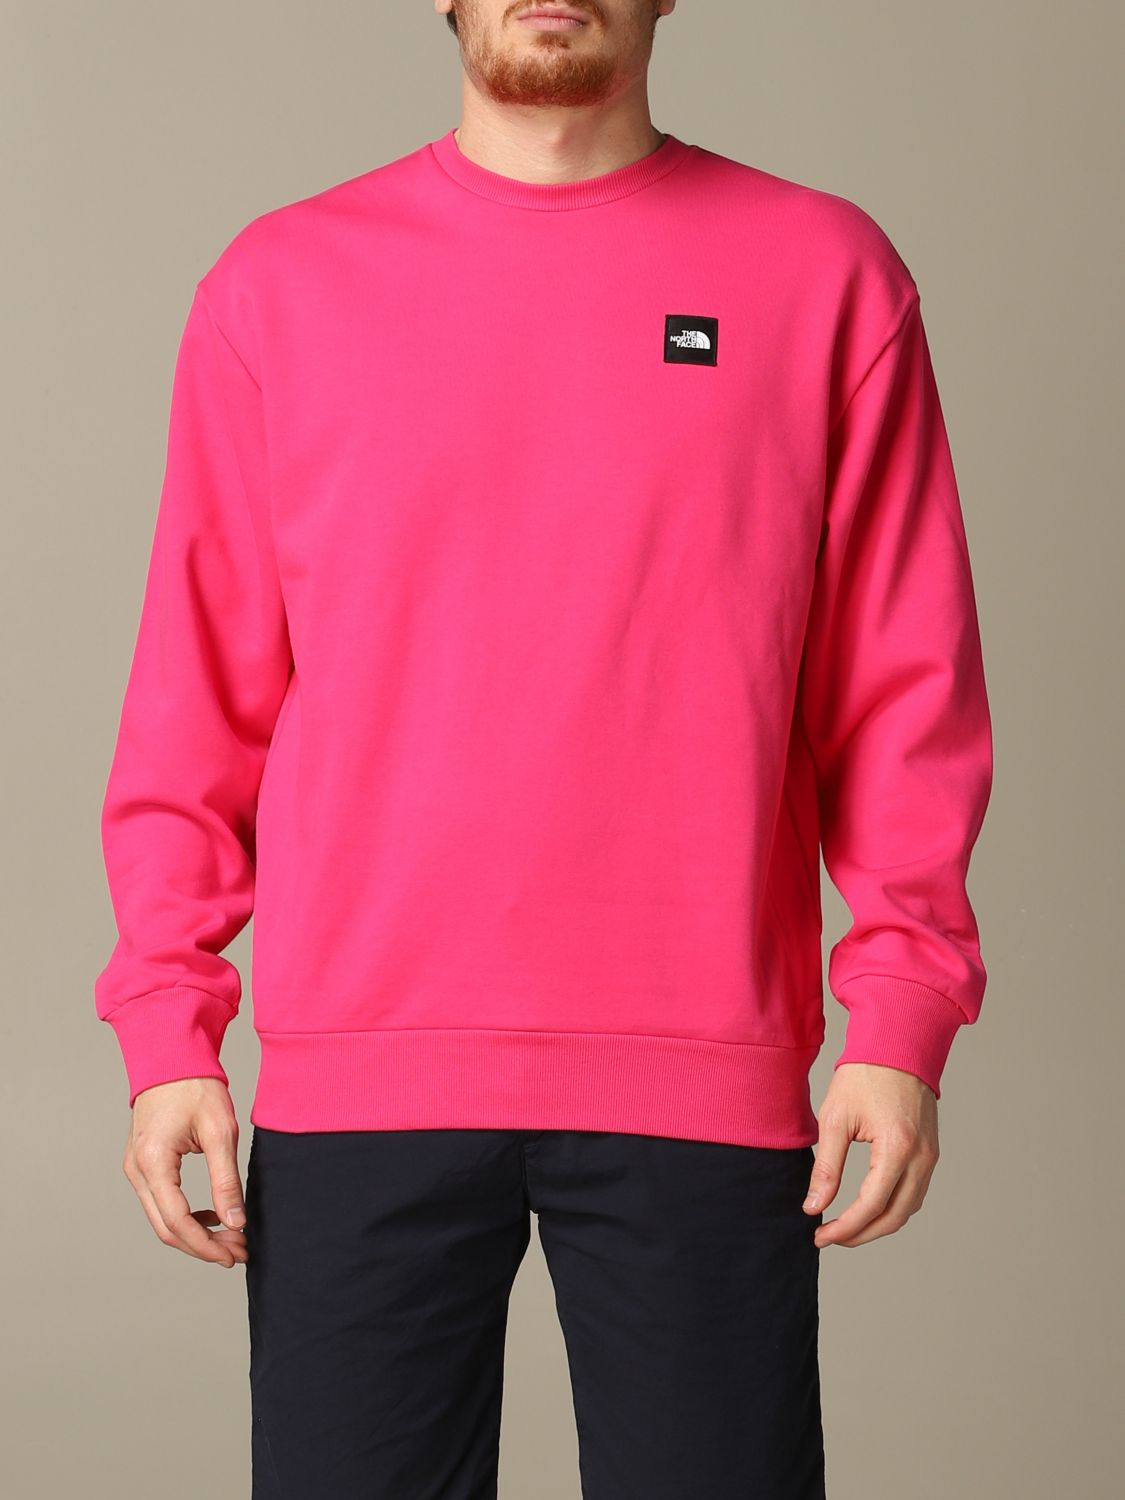 the north face men's sweater